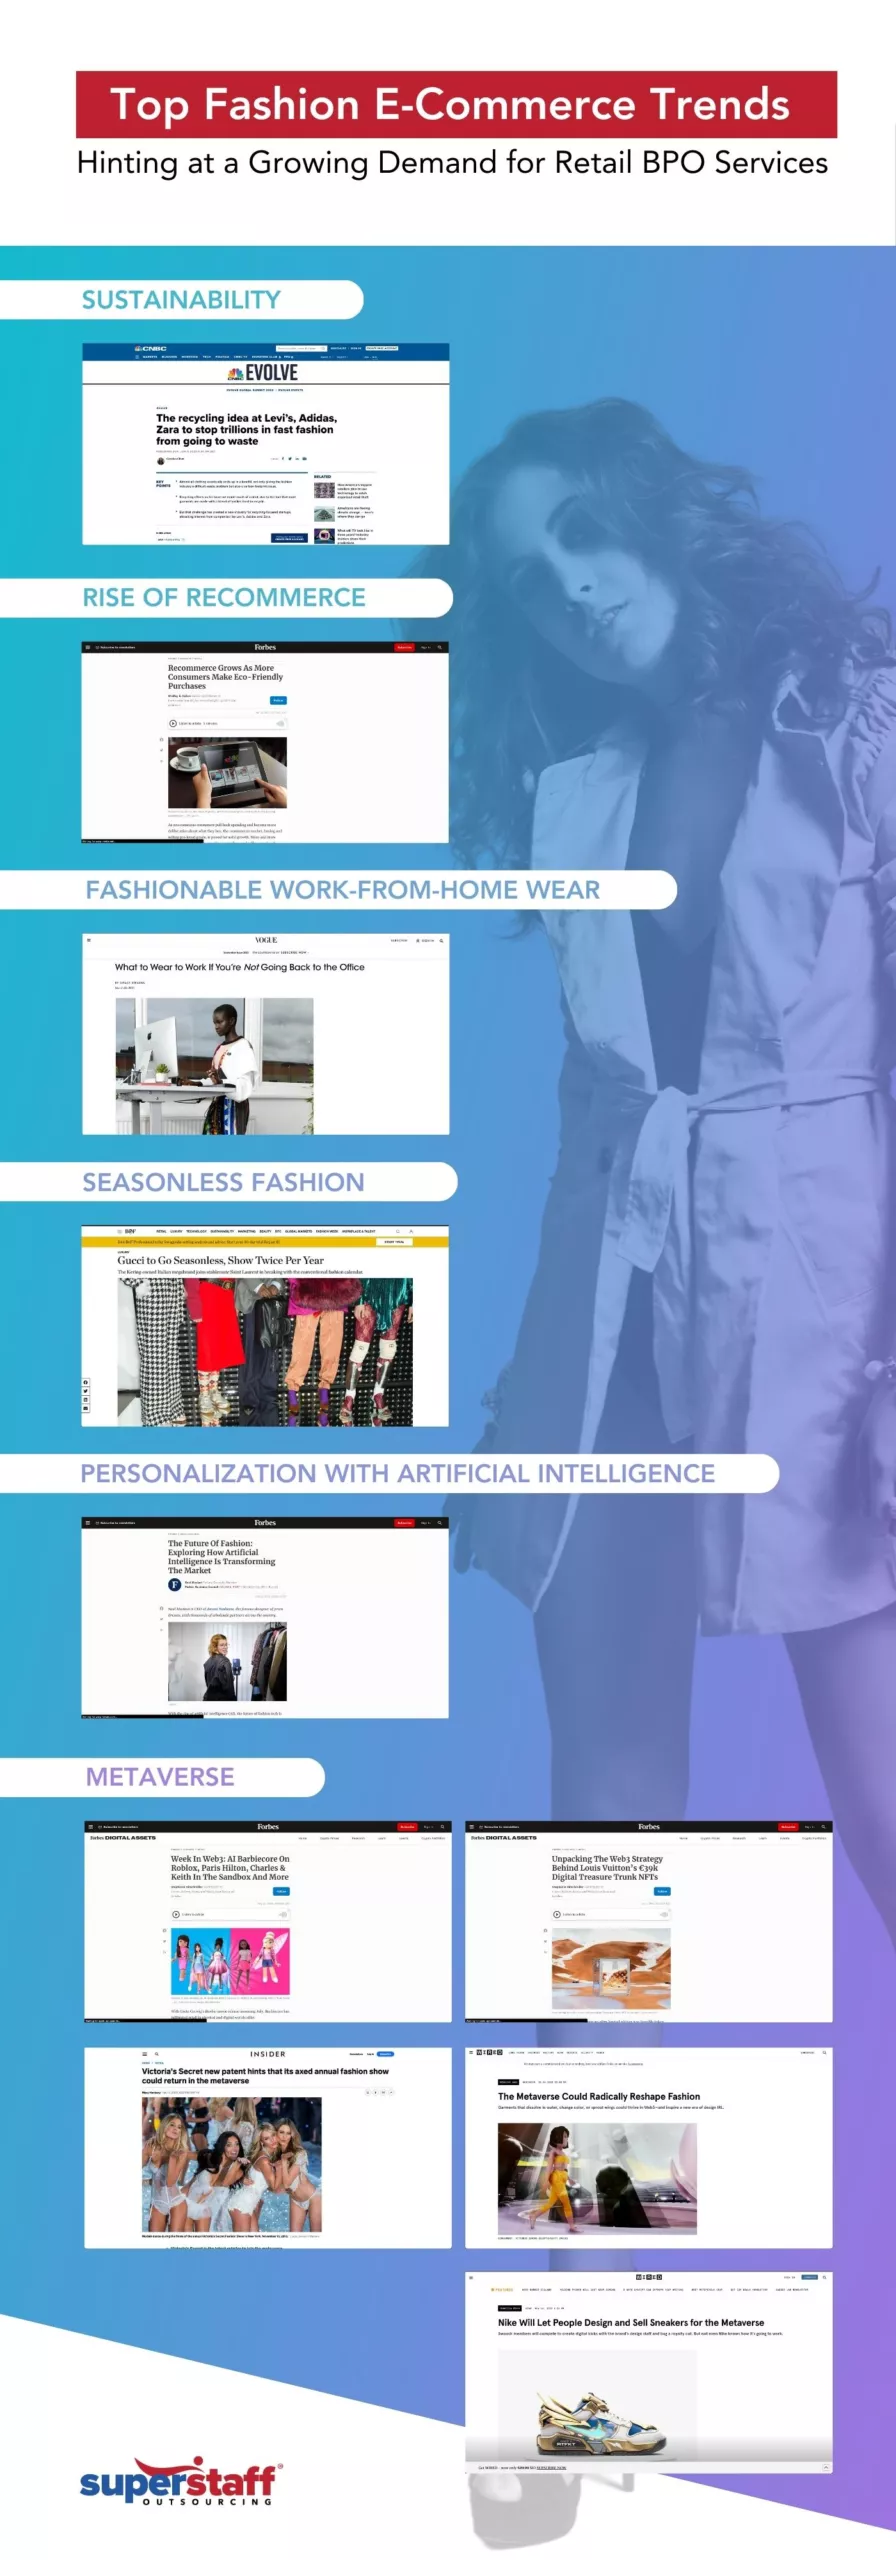 Top Fashion E-Commerce Trends Hinting at a Growing Demand for outsourced retail services.